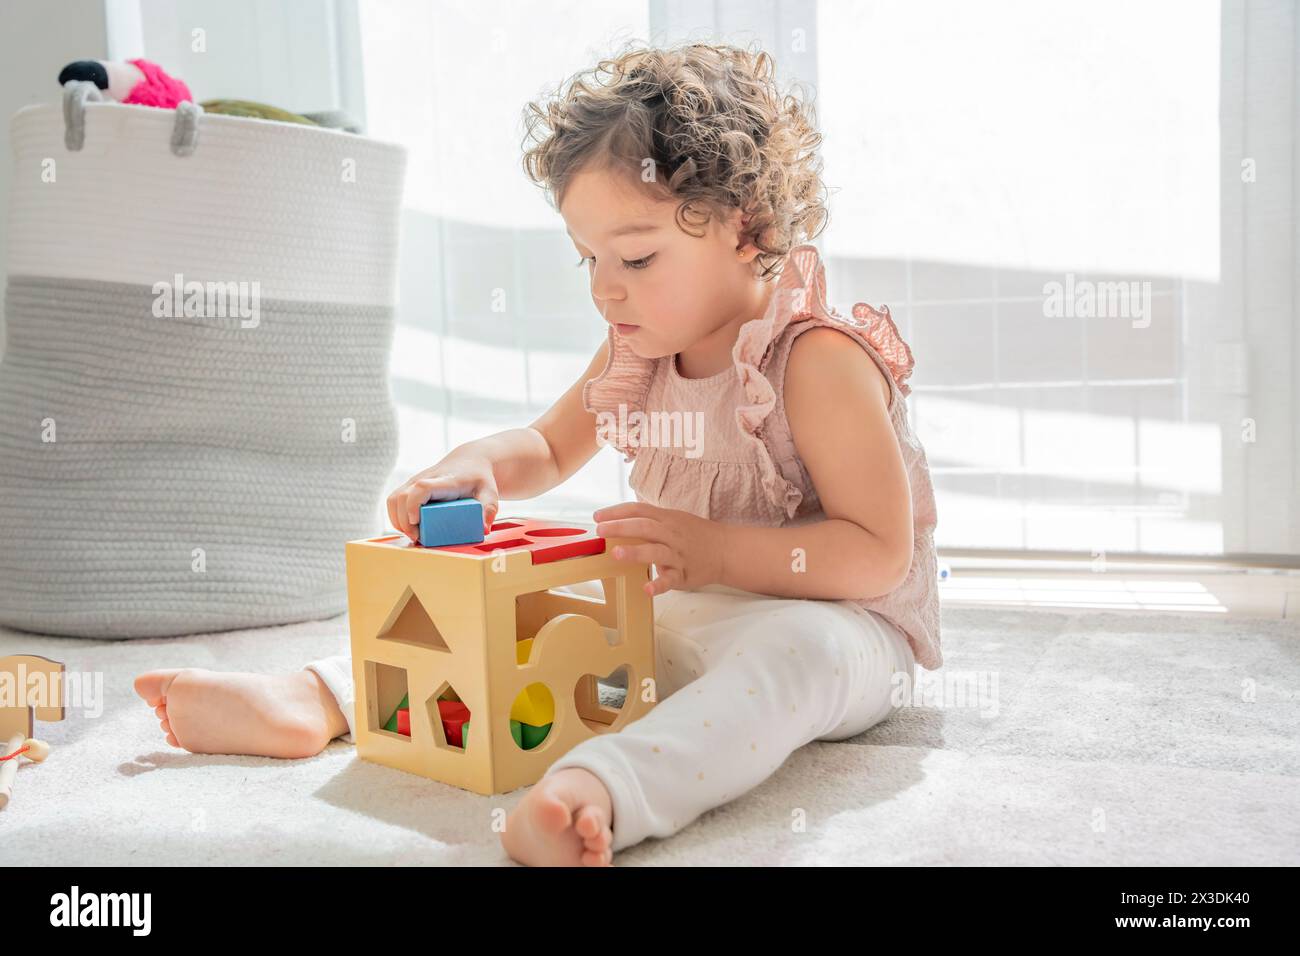 cute little girl with curly hair sitting on the floor playing with cube of wooden colorful pieces and shapes. montessori materials. concept developmen Stock Photo